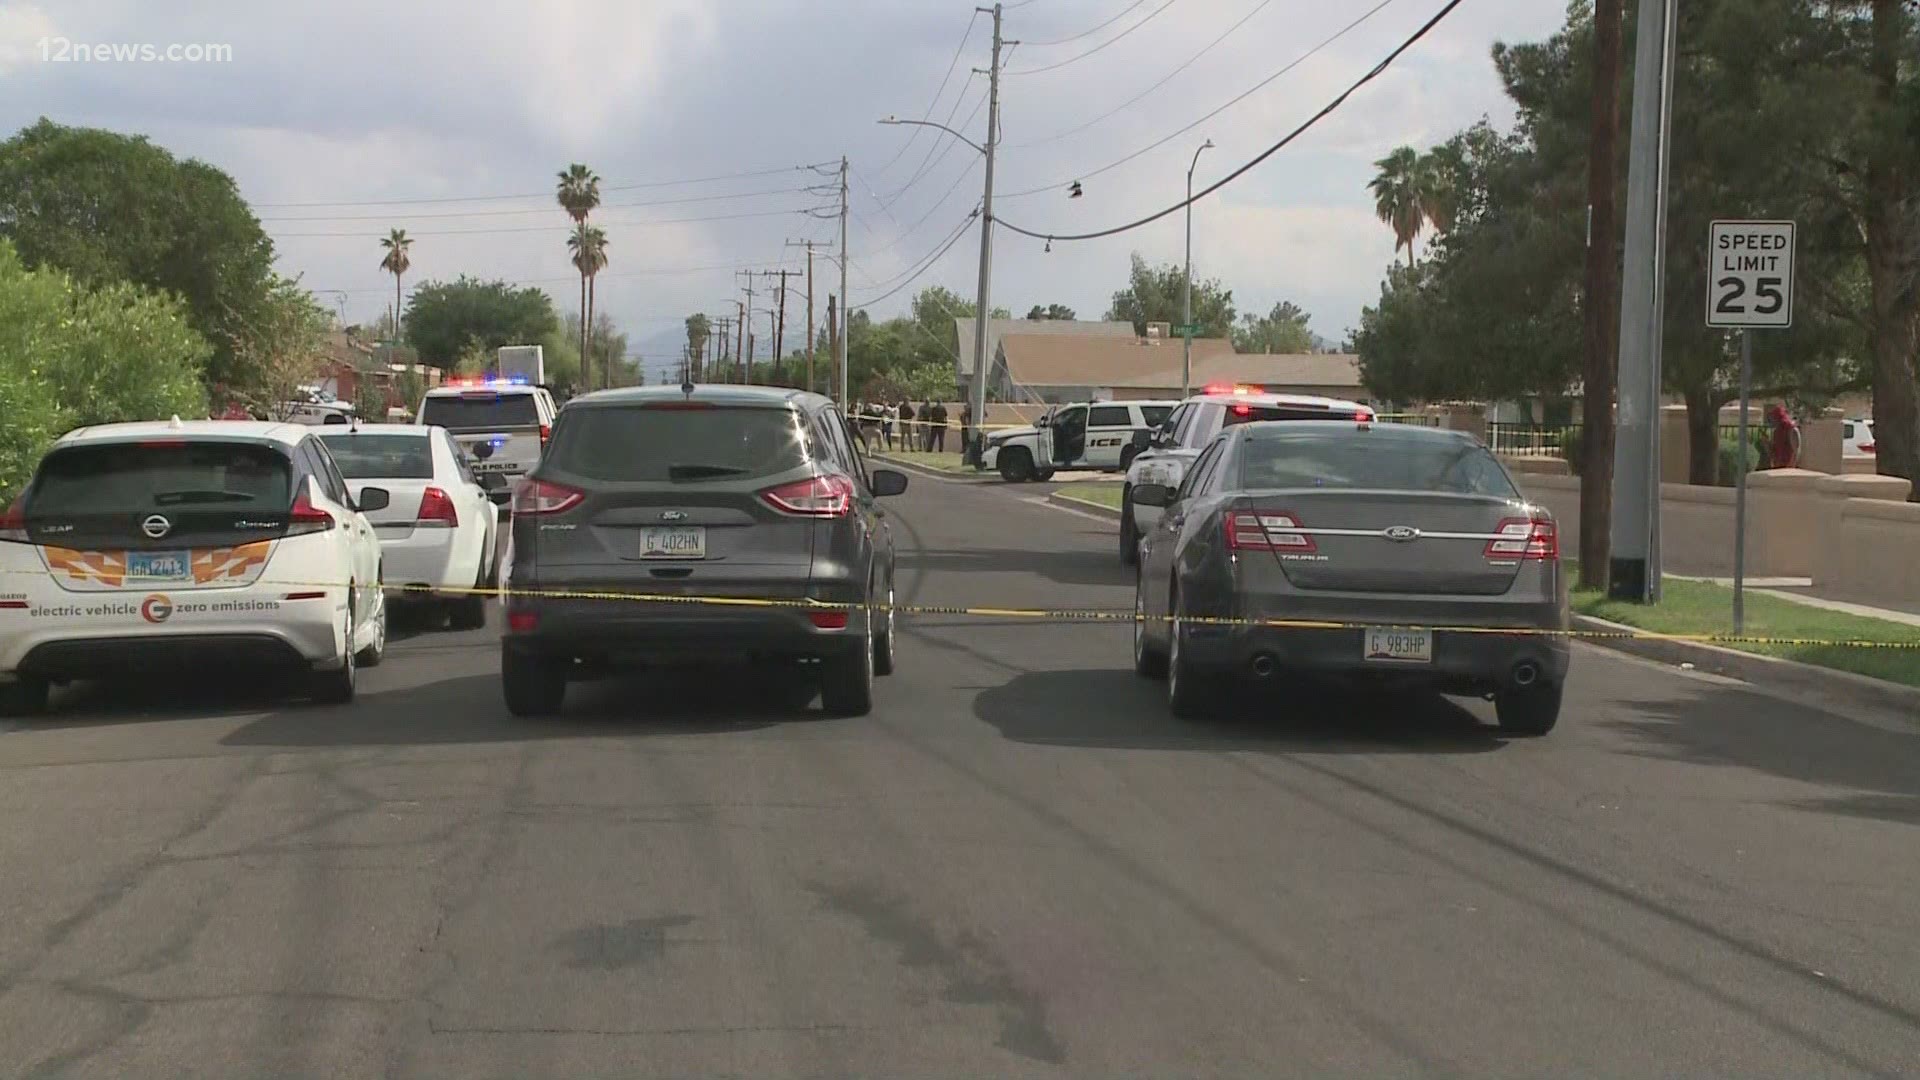 The shooting happened near 61st and Glendale avenues.